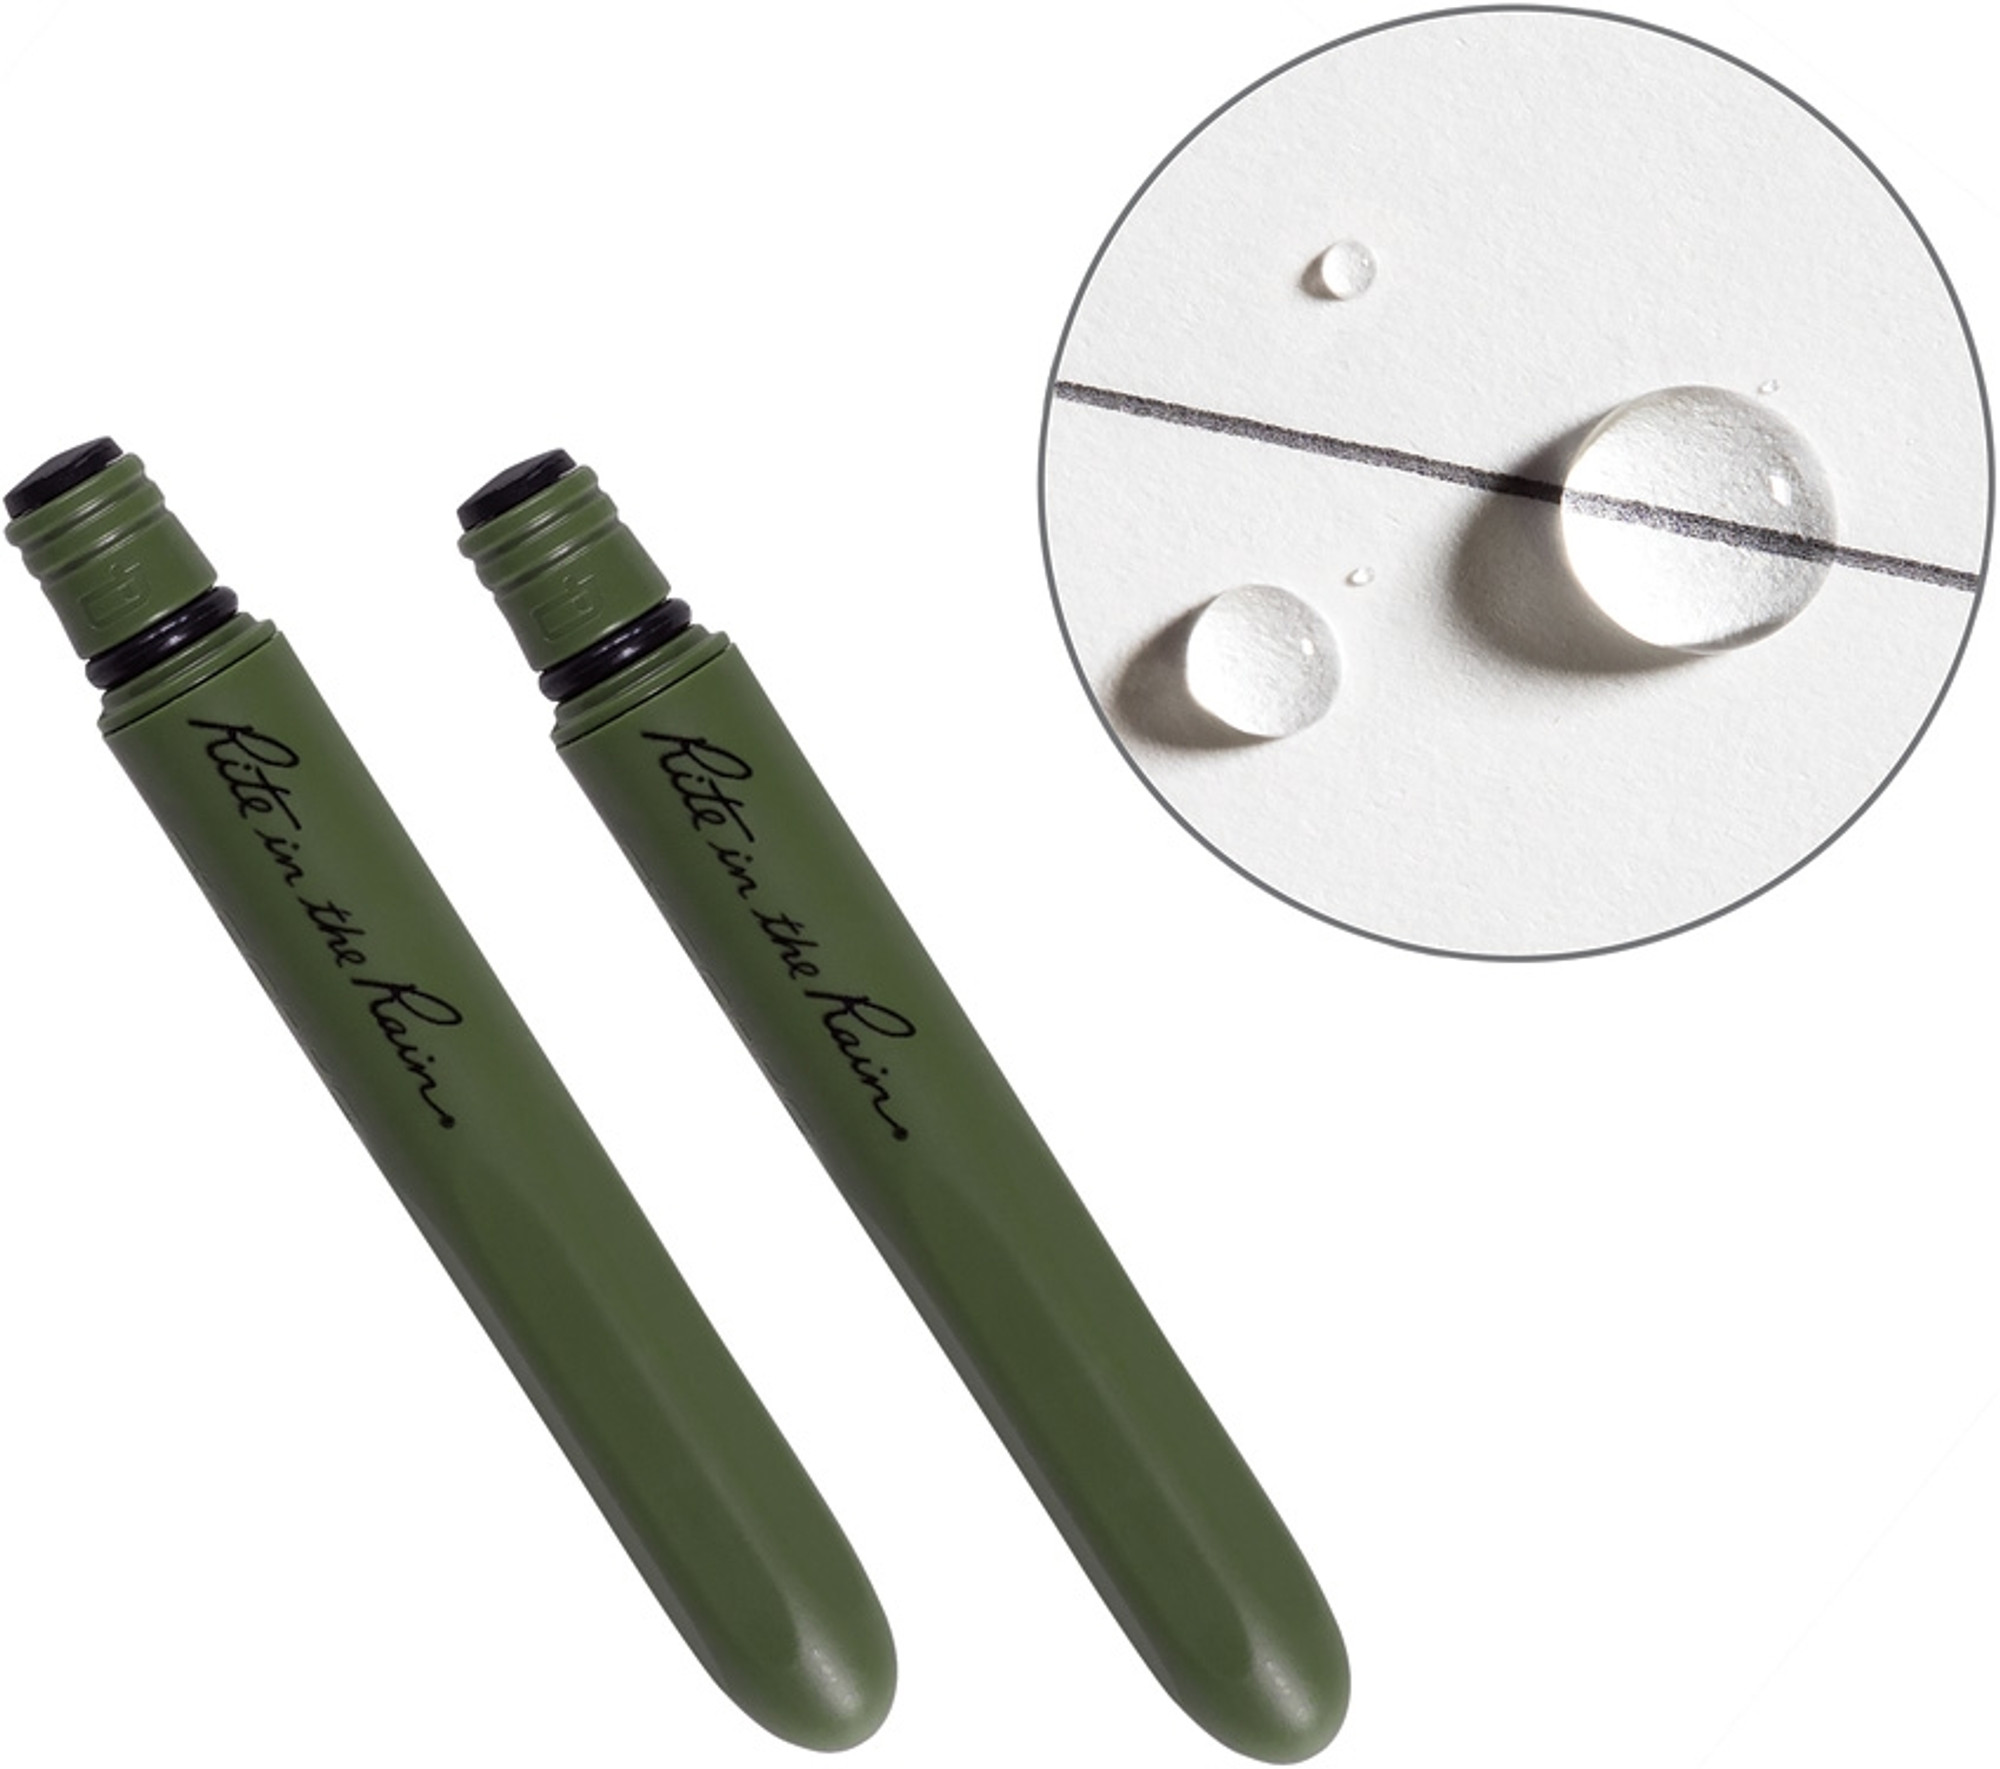 All-Weather Tough Plastic Pen - Olive Drab